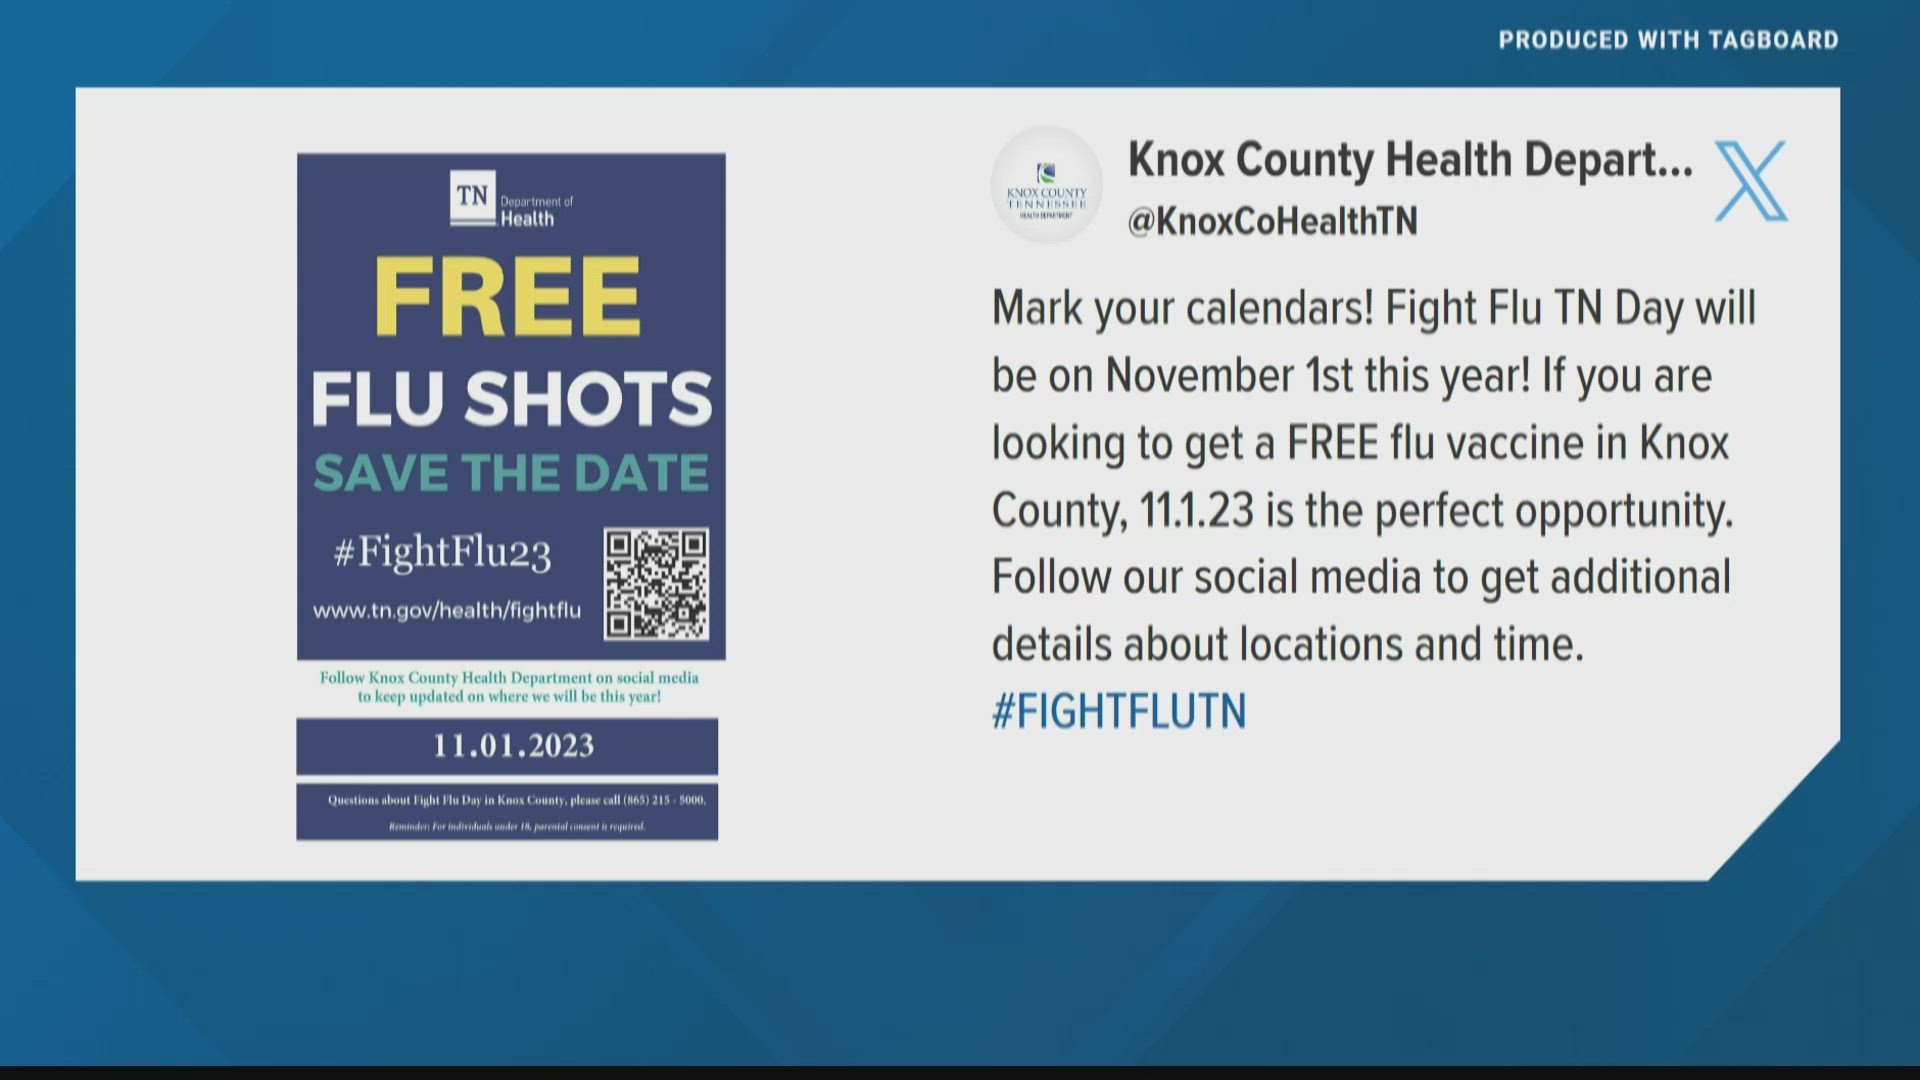 Health officials are offering free flu shots on Nov. 1.